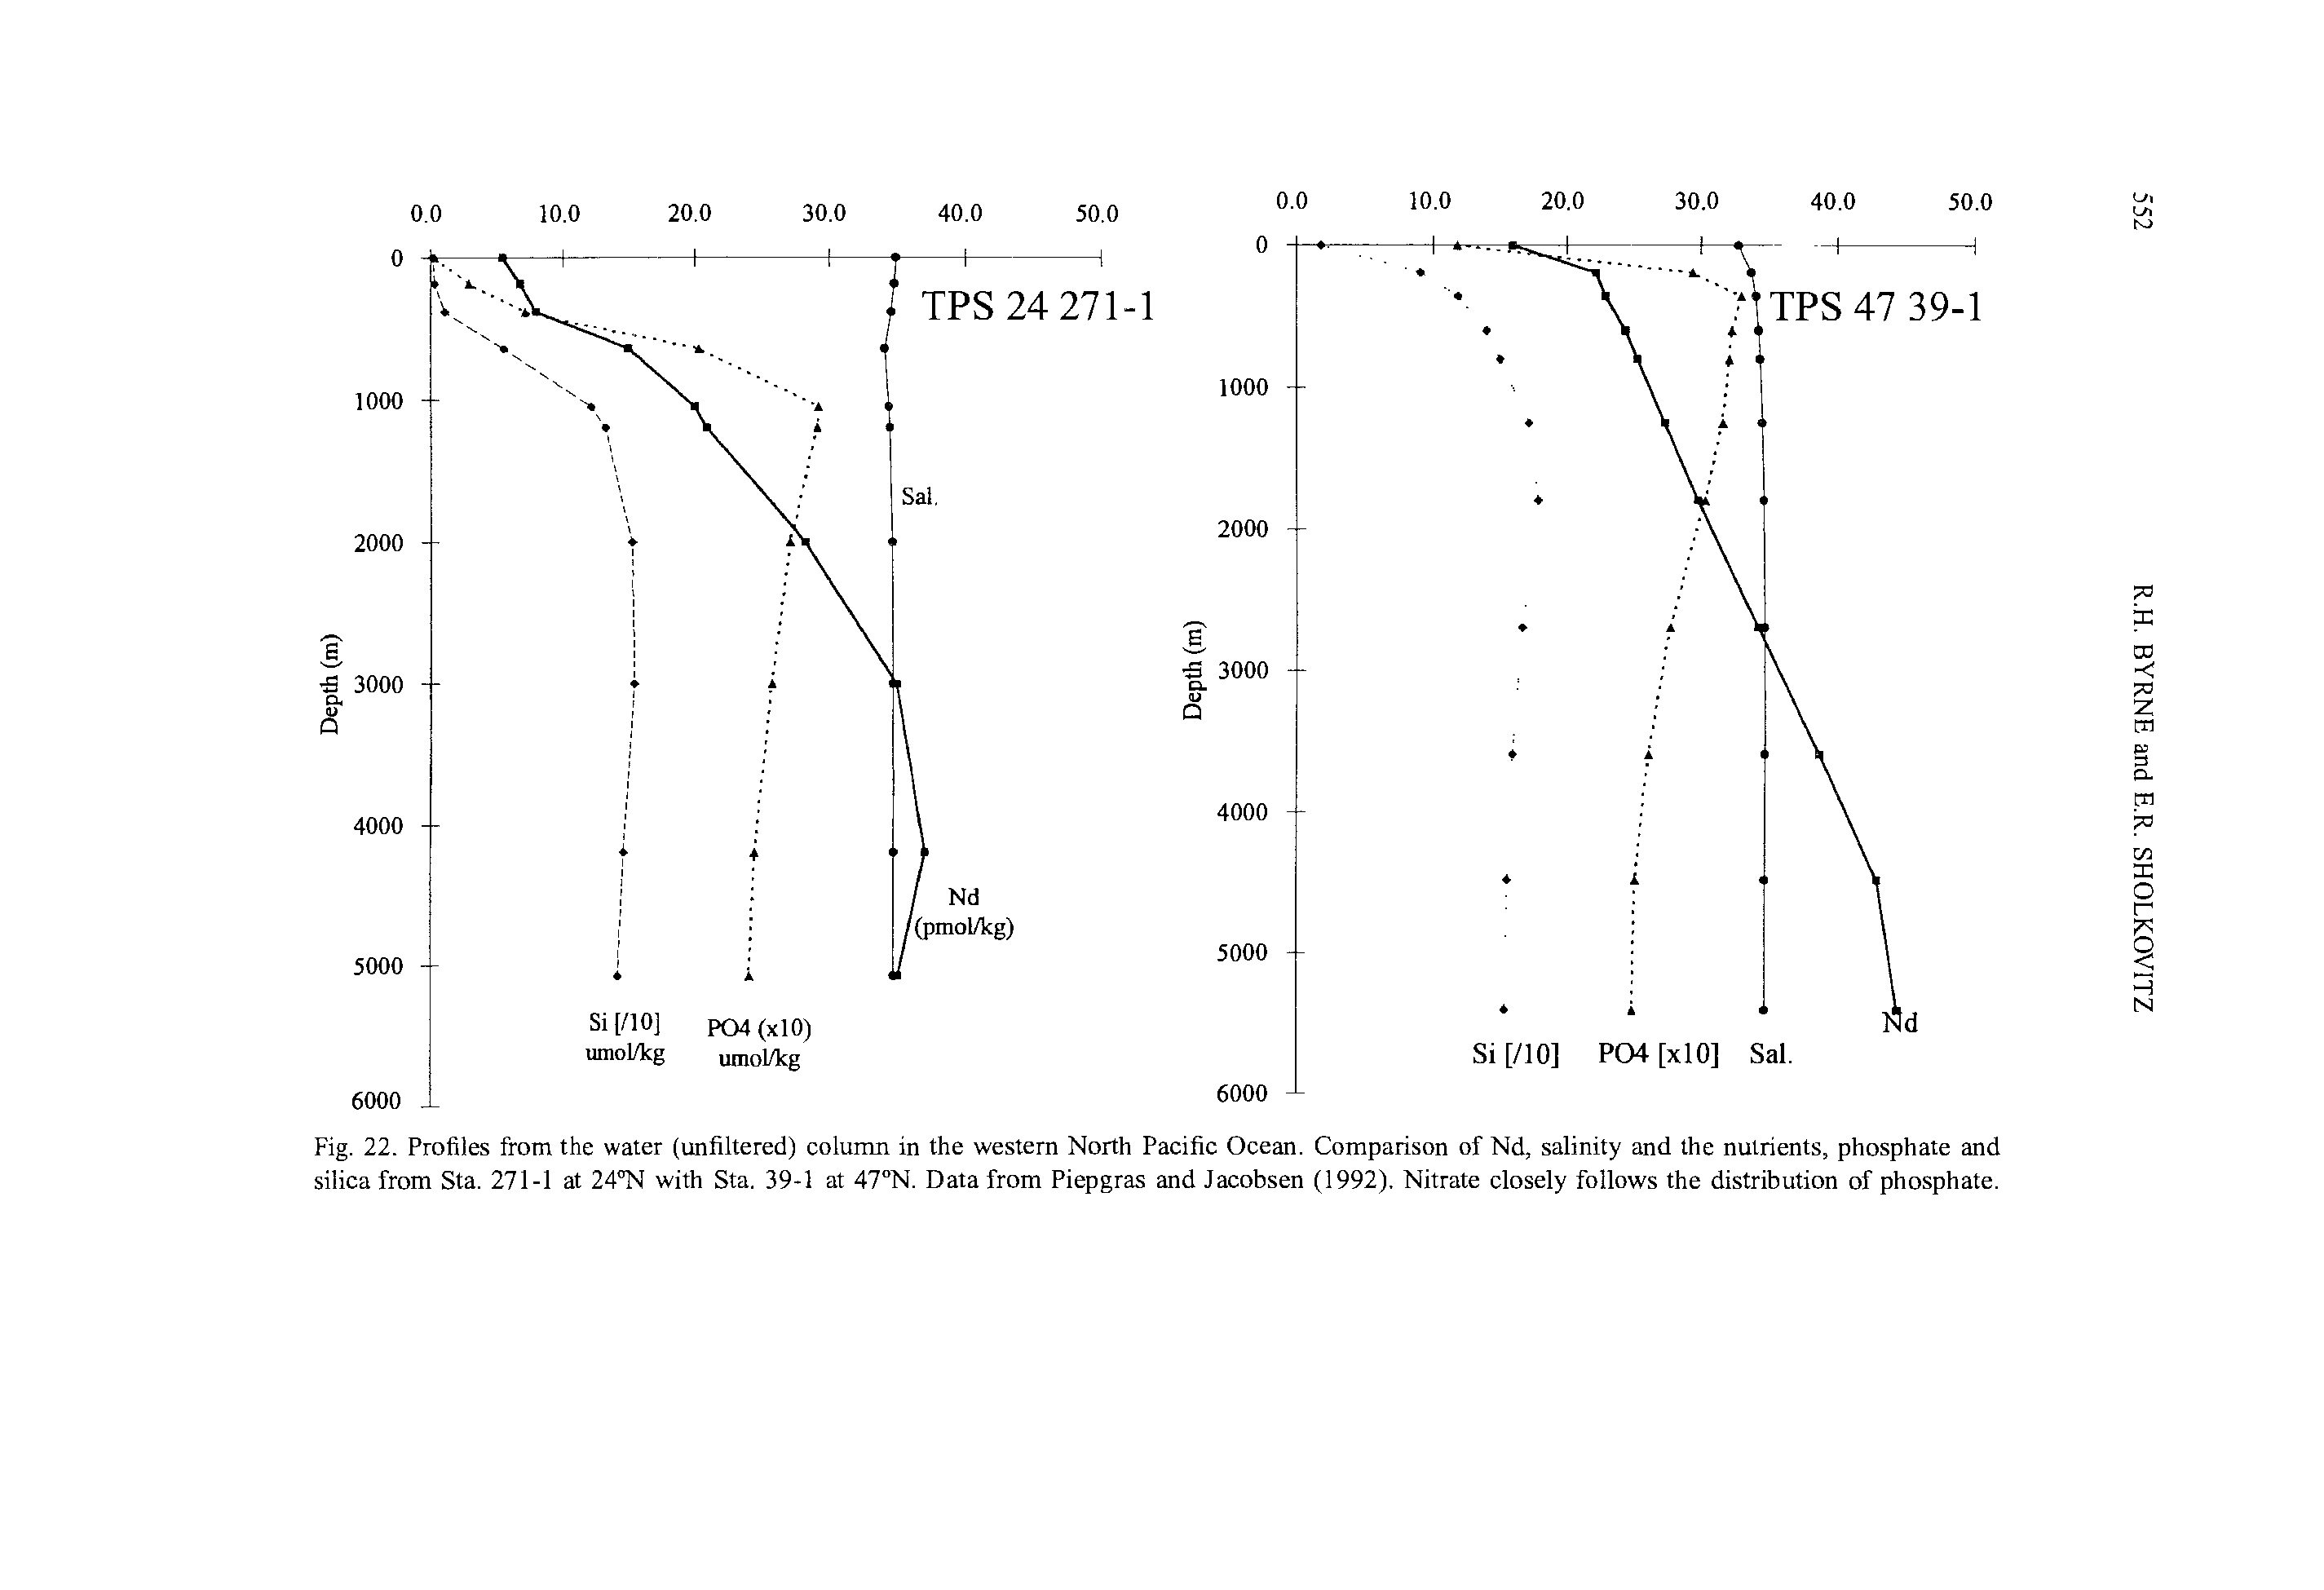 Fig. 22. Profiles from the water (unfiltered) column in the western North Pacific Ocean. Comparison of Nd, salinity and the nutrients, phosphate and silica from Sta. 271-1 at 24 N with Sta. 39-1 at 47°N. Data from Piepgras and Jacobsen (1992), Nitrate closely follows the distribution of phosphate.